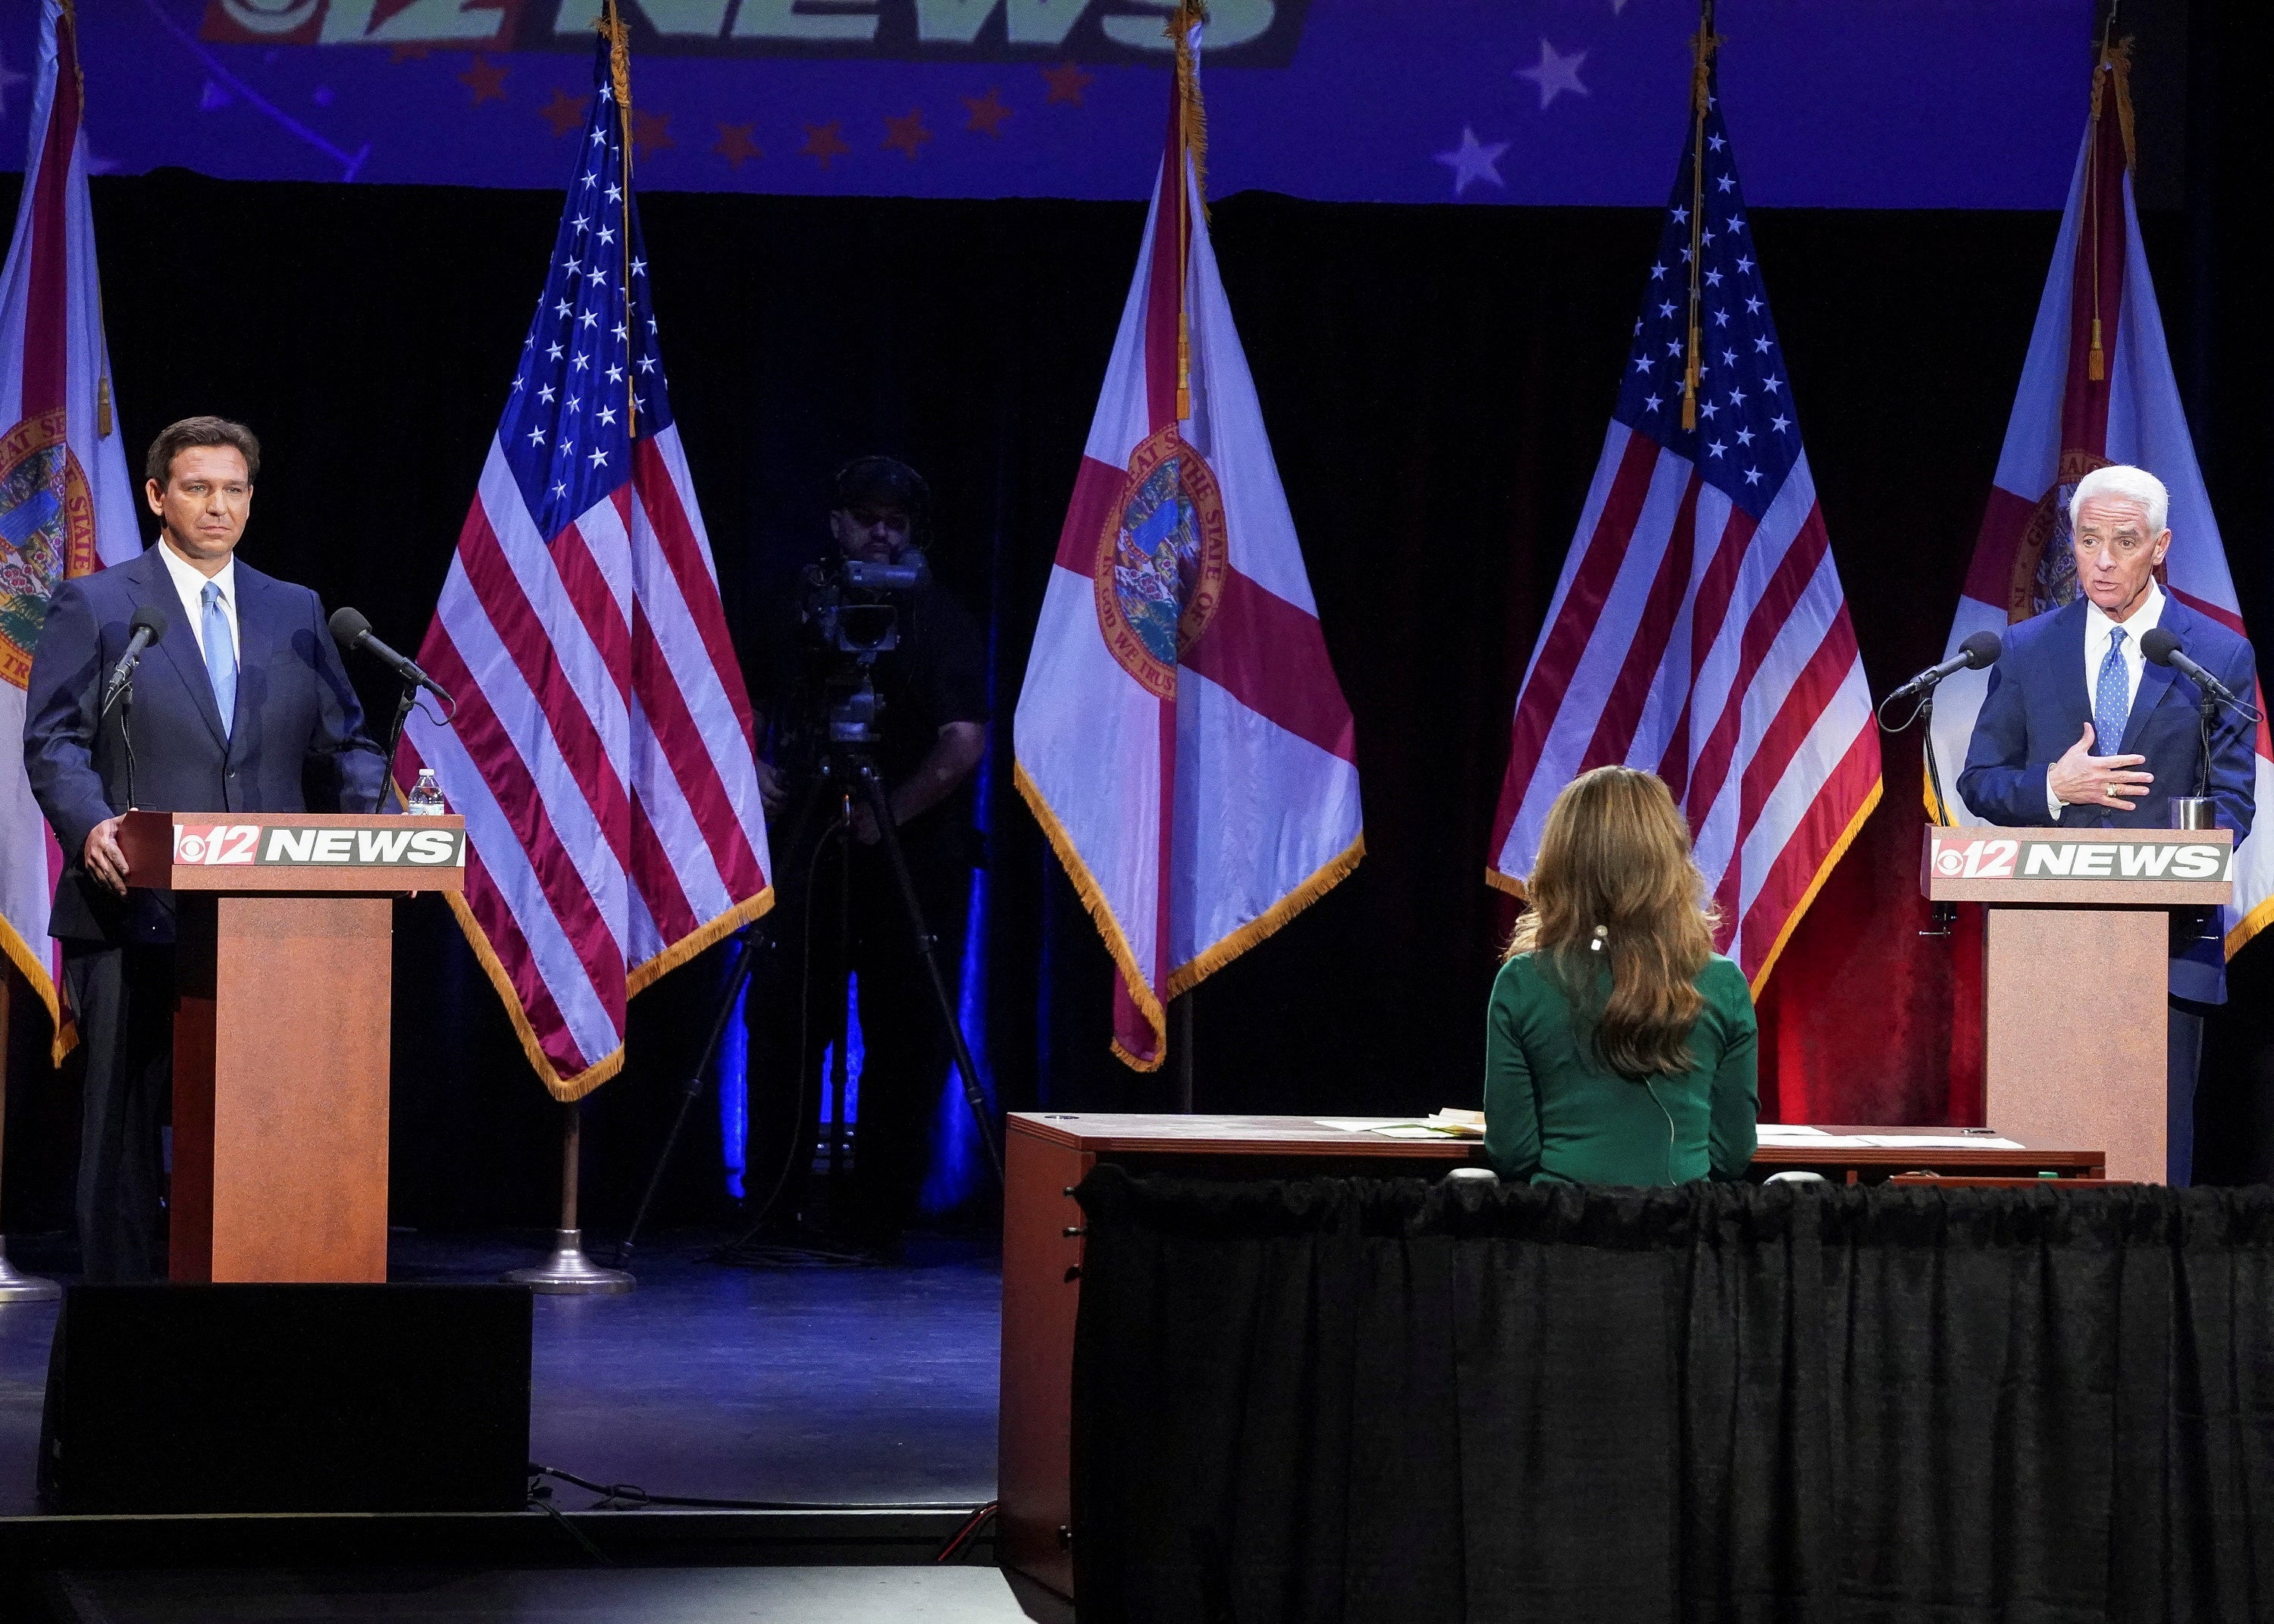 DeSantis, left, faces off against Crist in the only debate in the race for Florida governor